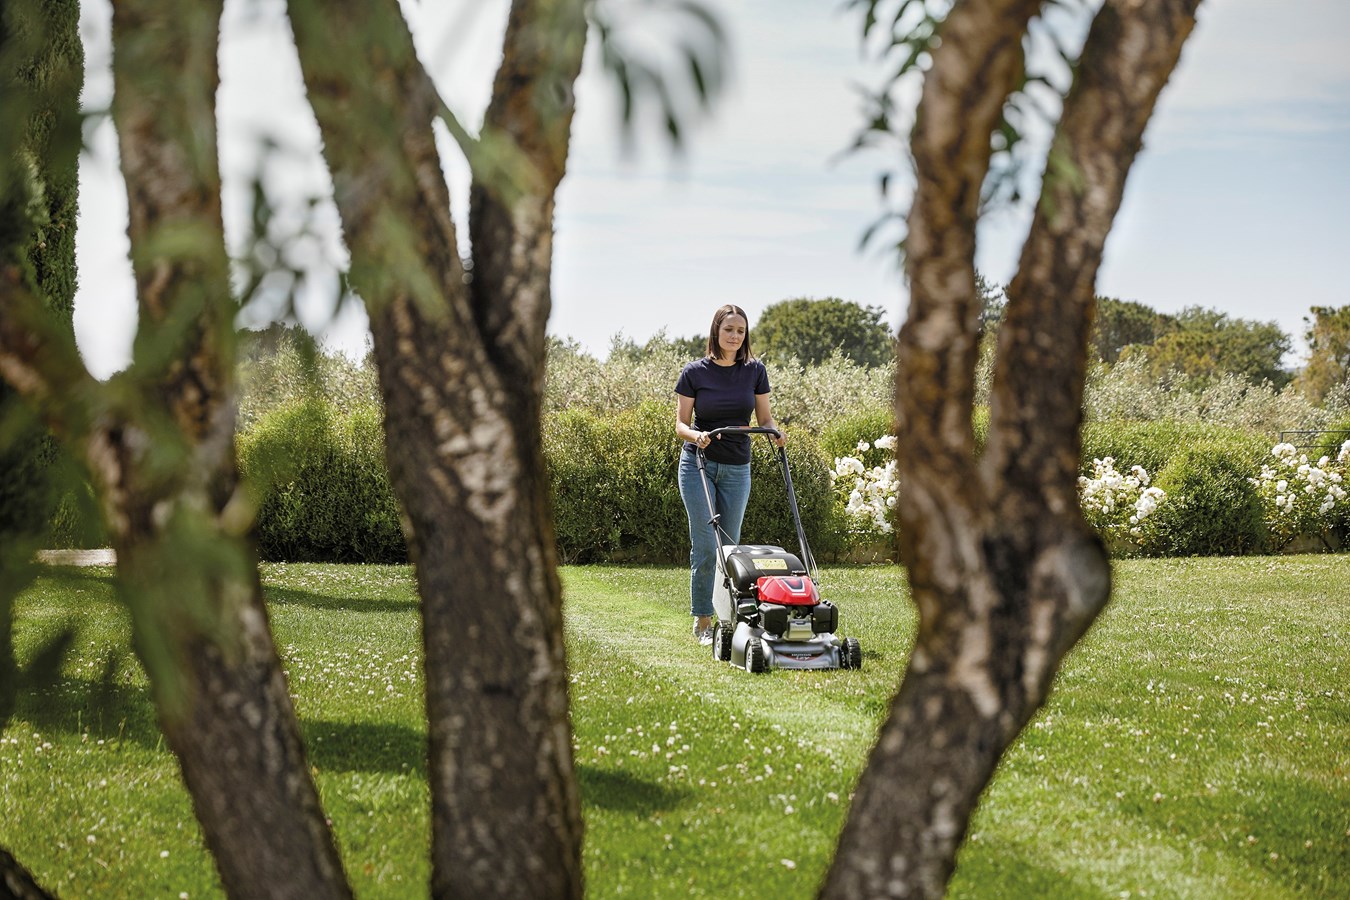 Savings of up to £400 across Lawn & Garden range Campaign launches on March 1st and runs until July 31st Includes new Small Miimo; Petrol and Cordless ranges